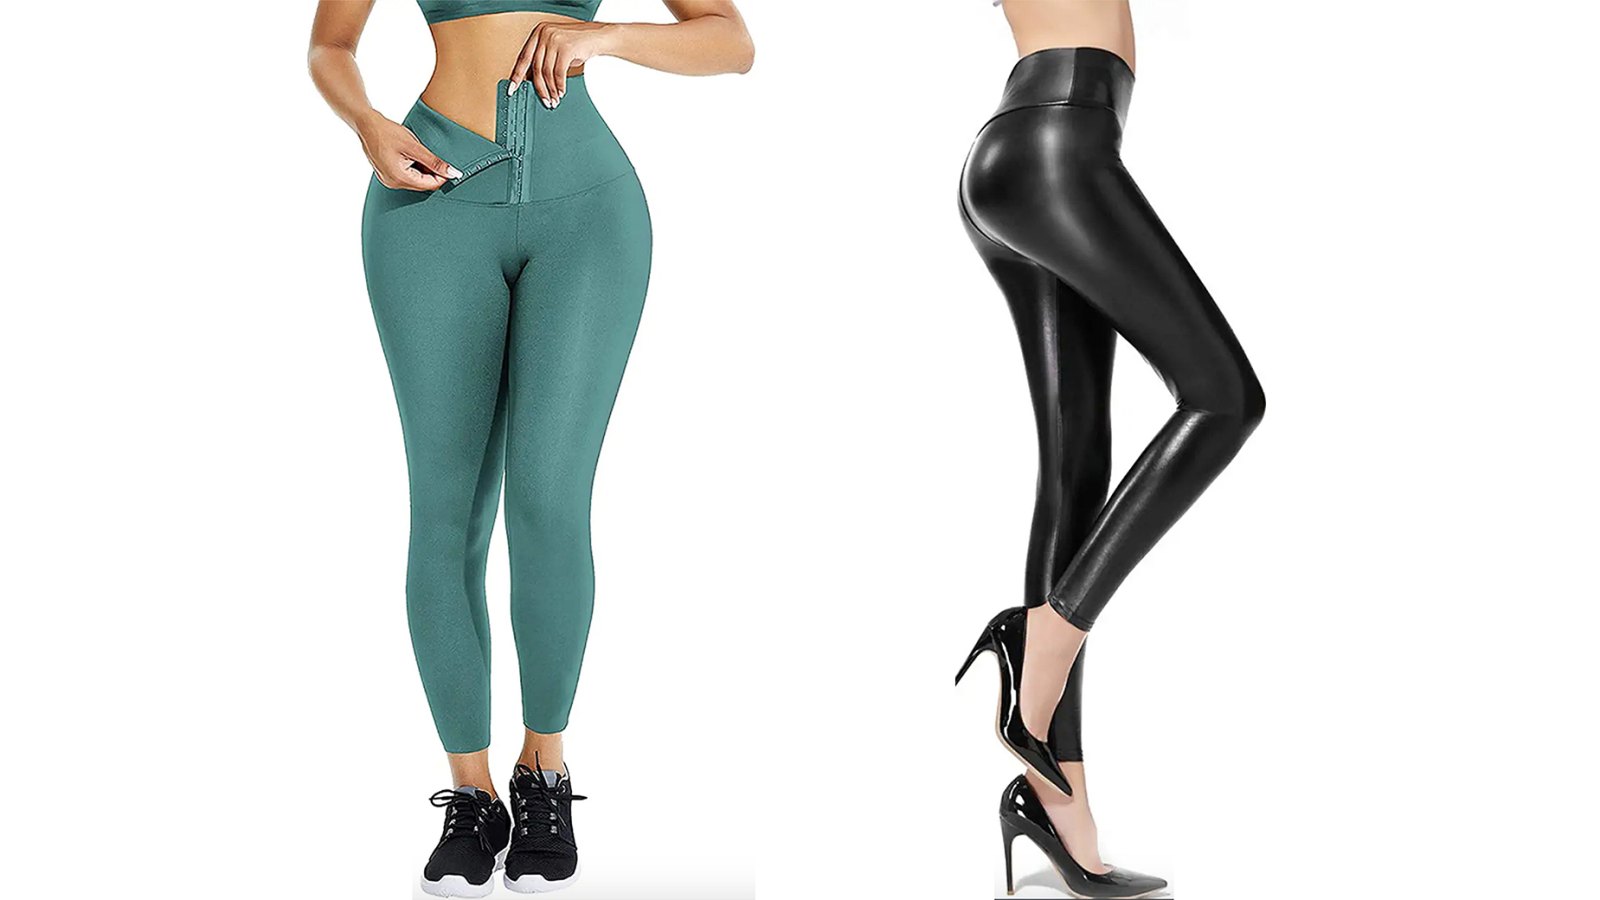 Women's Yoga Leggings with Butt Seamless Booty Tight for Wife Daughter  Mother Friend S Black 